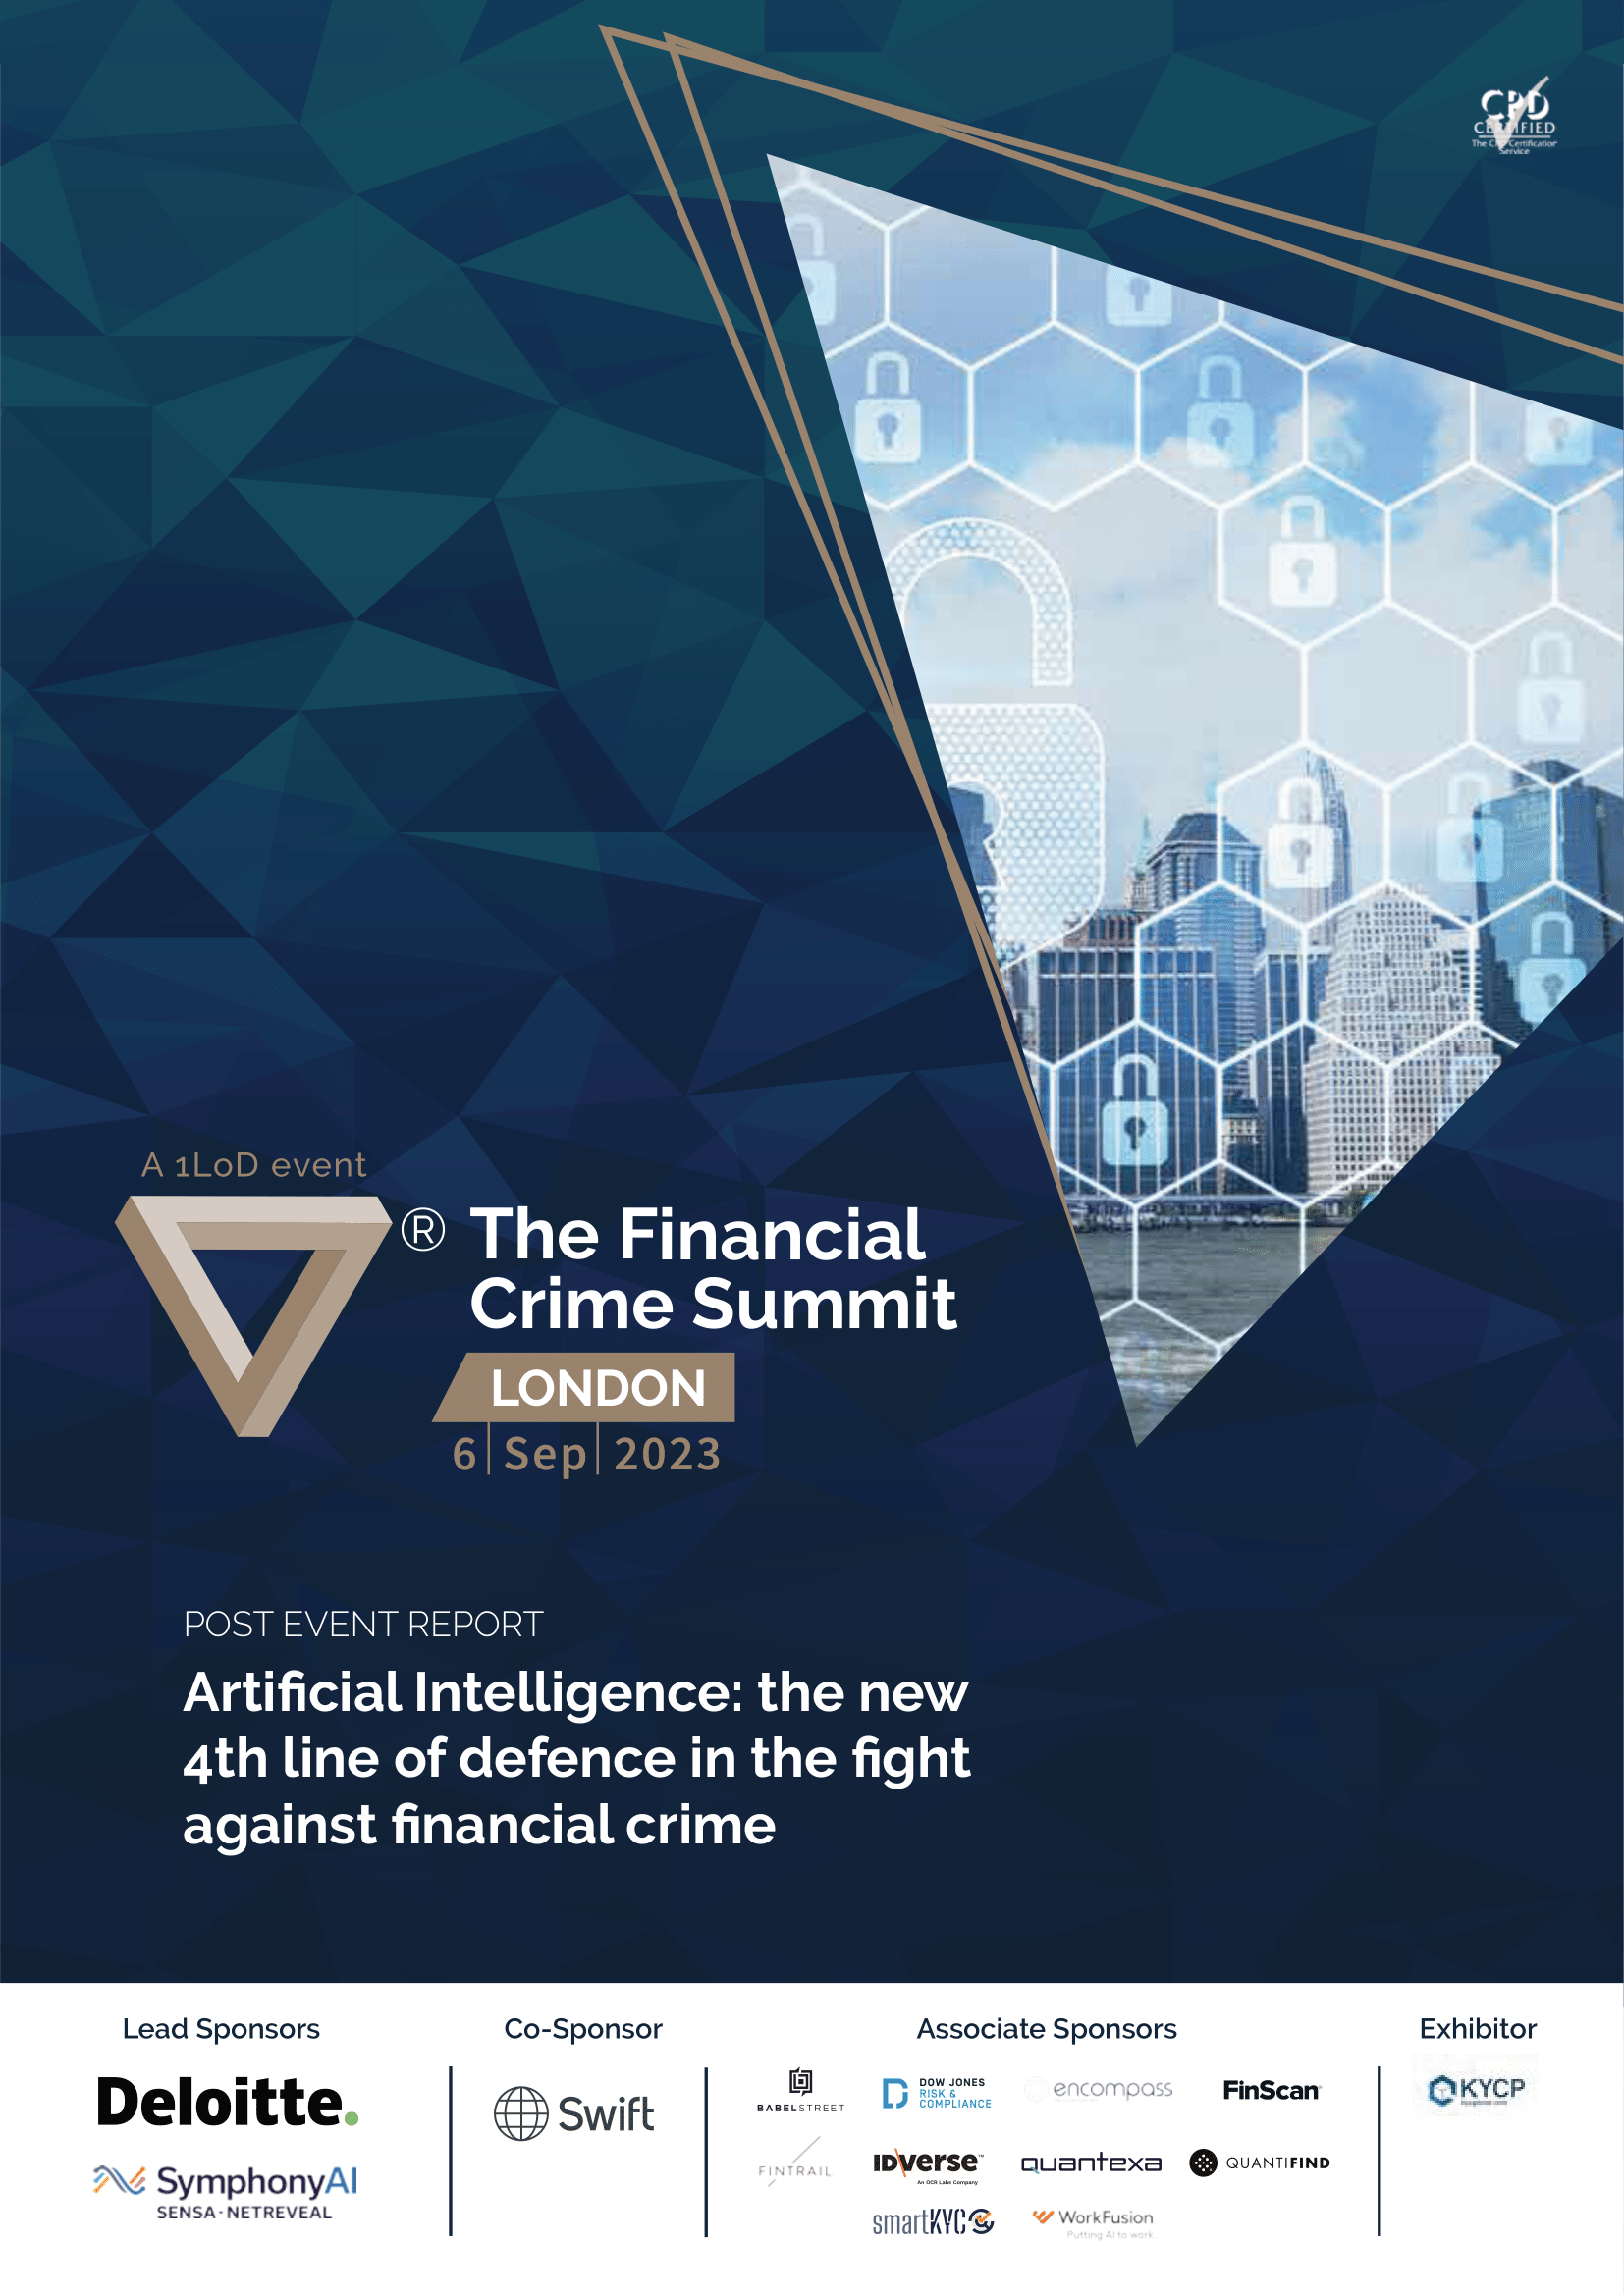 Artificial Intelligence: the new 4th line of defence in the fight against financial crime